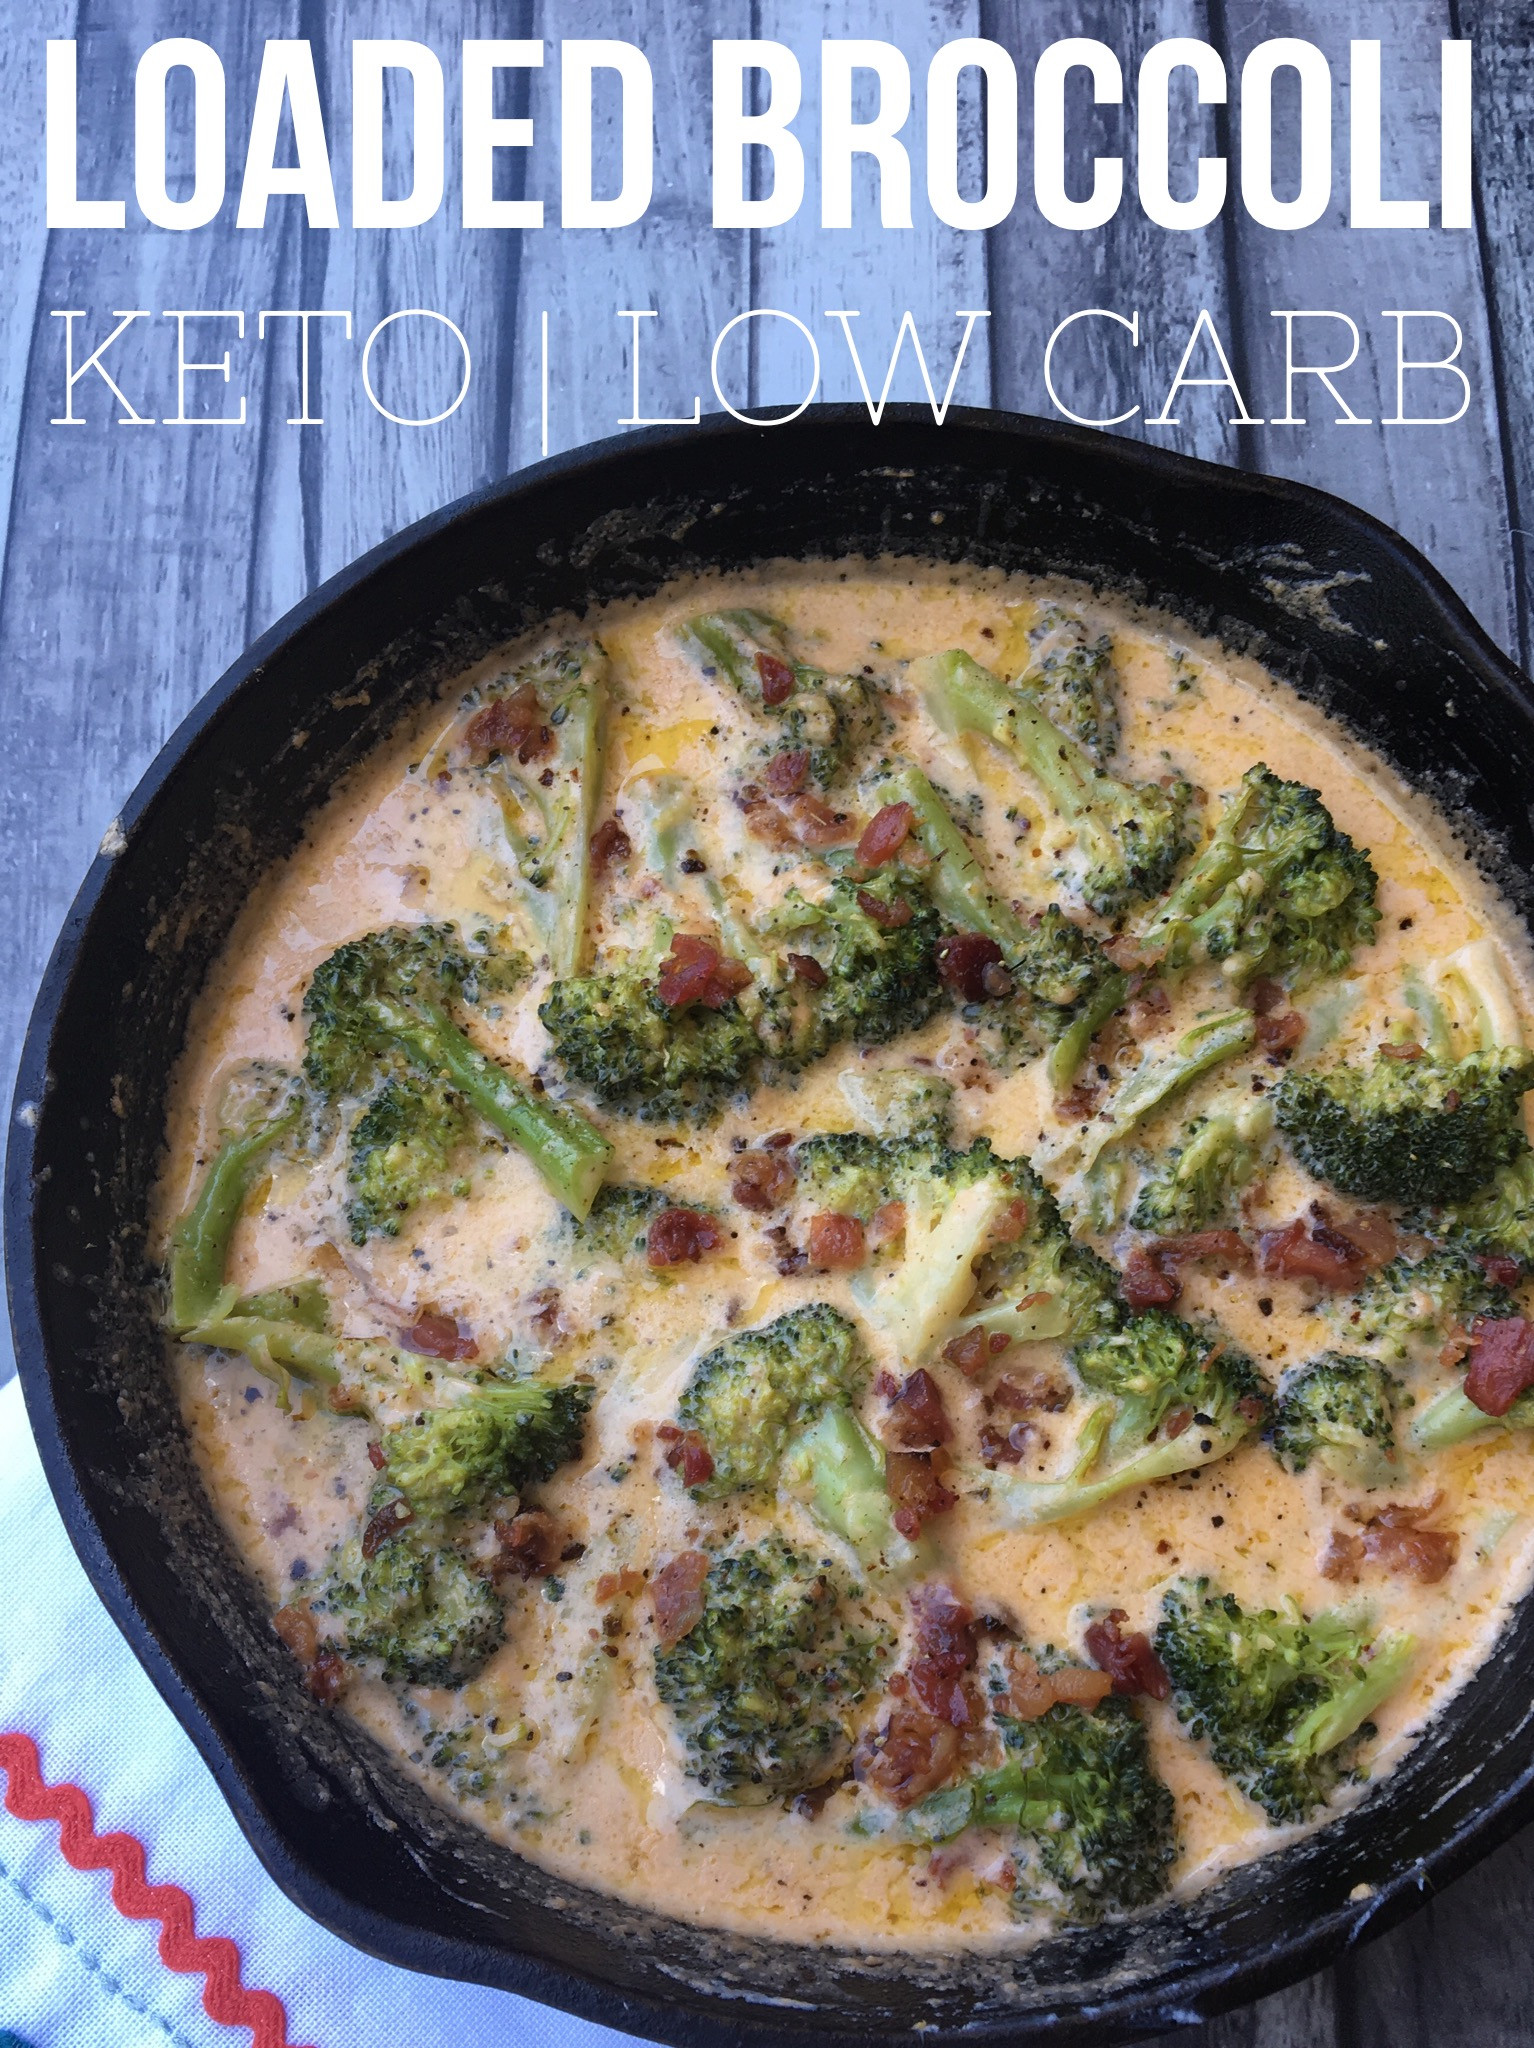 Low Carb Broccoli Recipes
 The Very Best Keto Low carb Friendly Loaded Broccoli